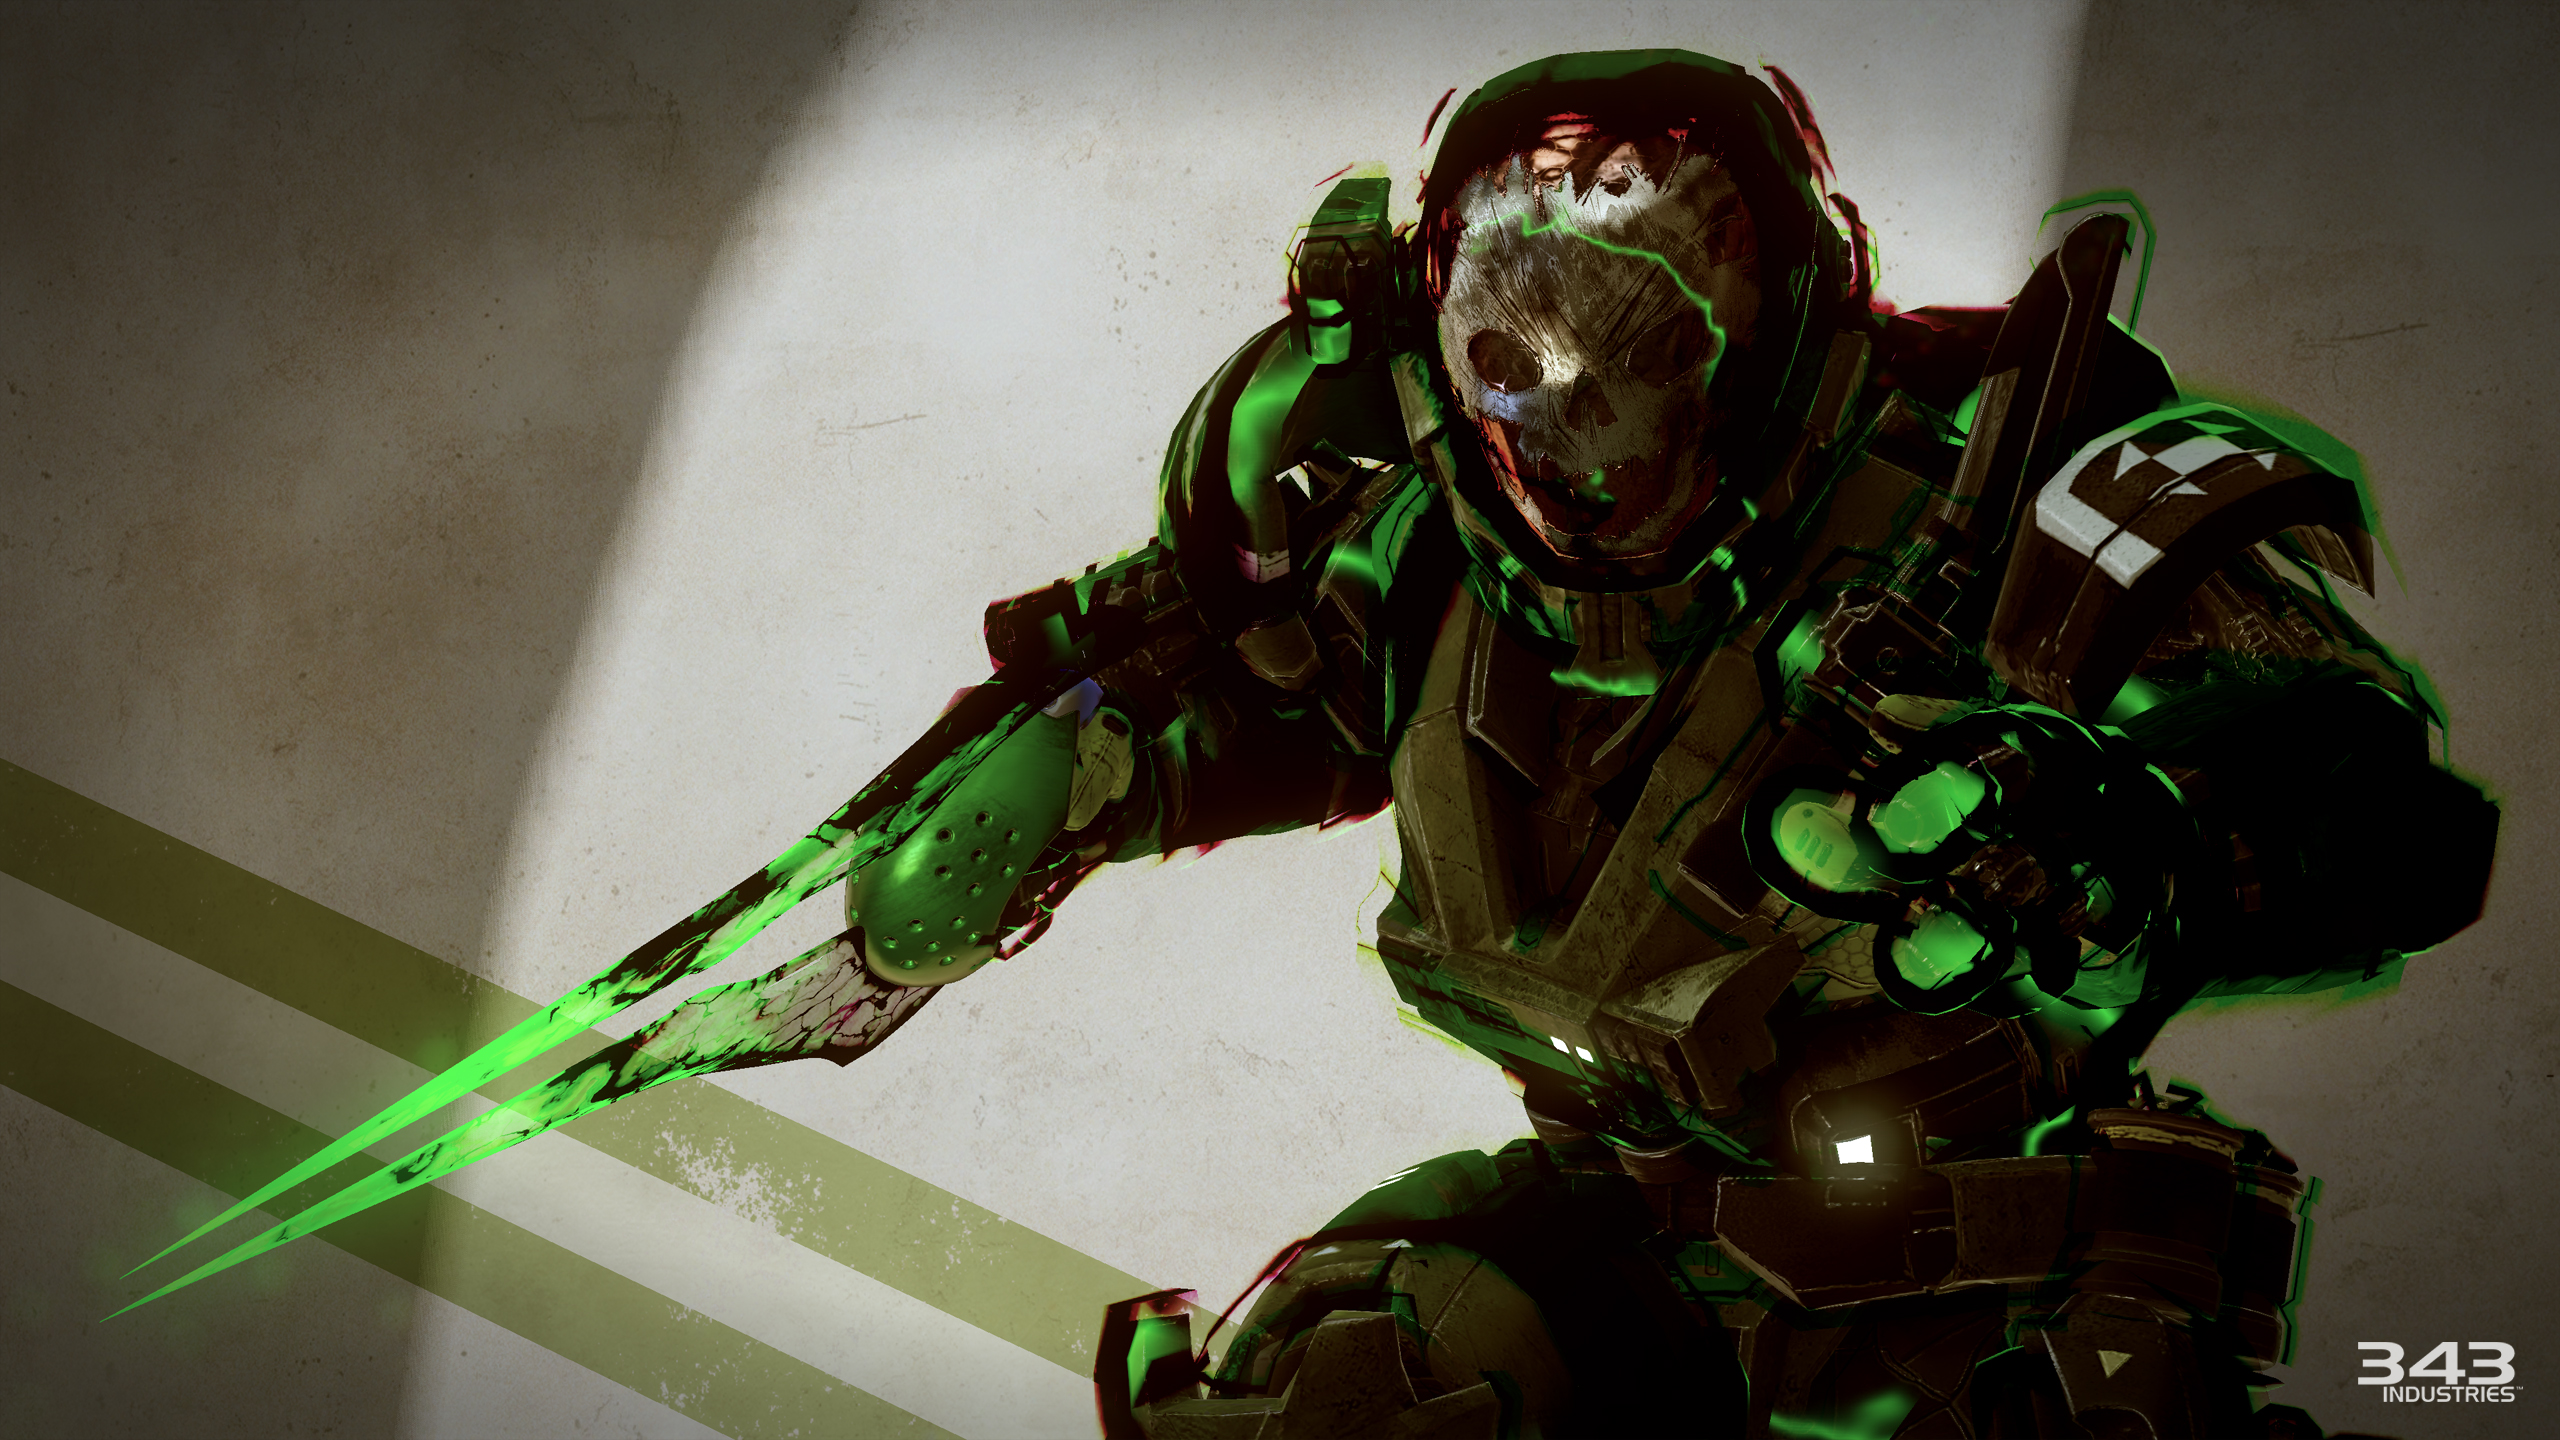 Video For Memories of Reach Available Today in Halo 5: Guardians